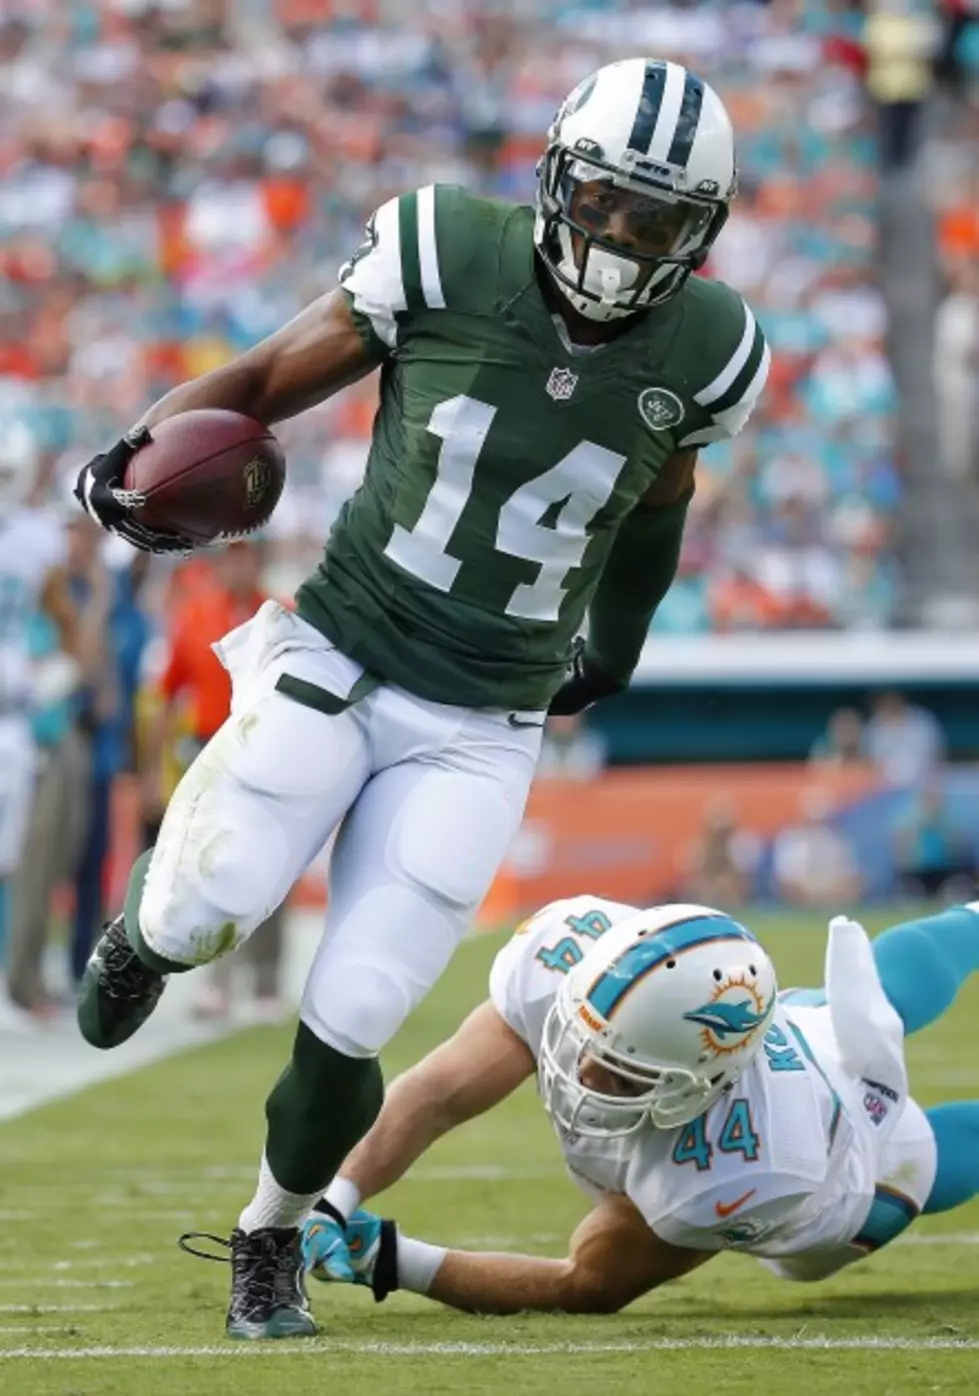 New York Jets Chris Owusu Shows Off Ridiculous Jumping Ability [VIDEO]